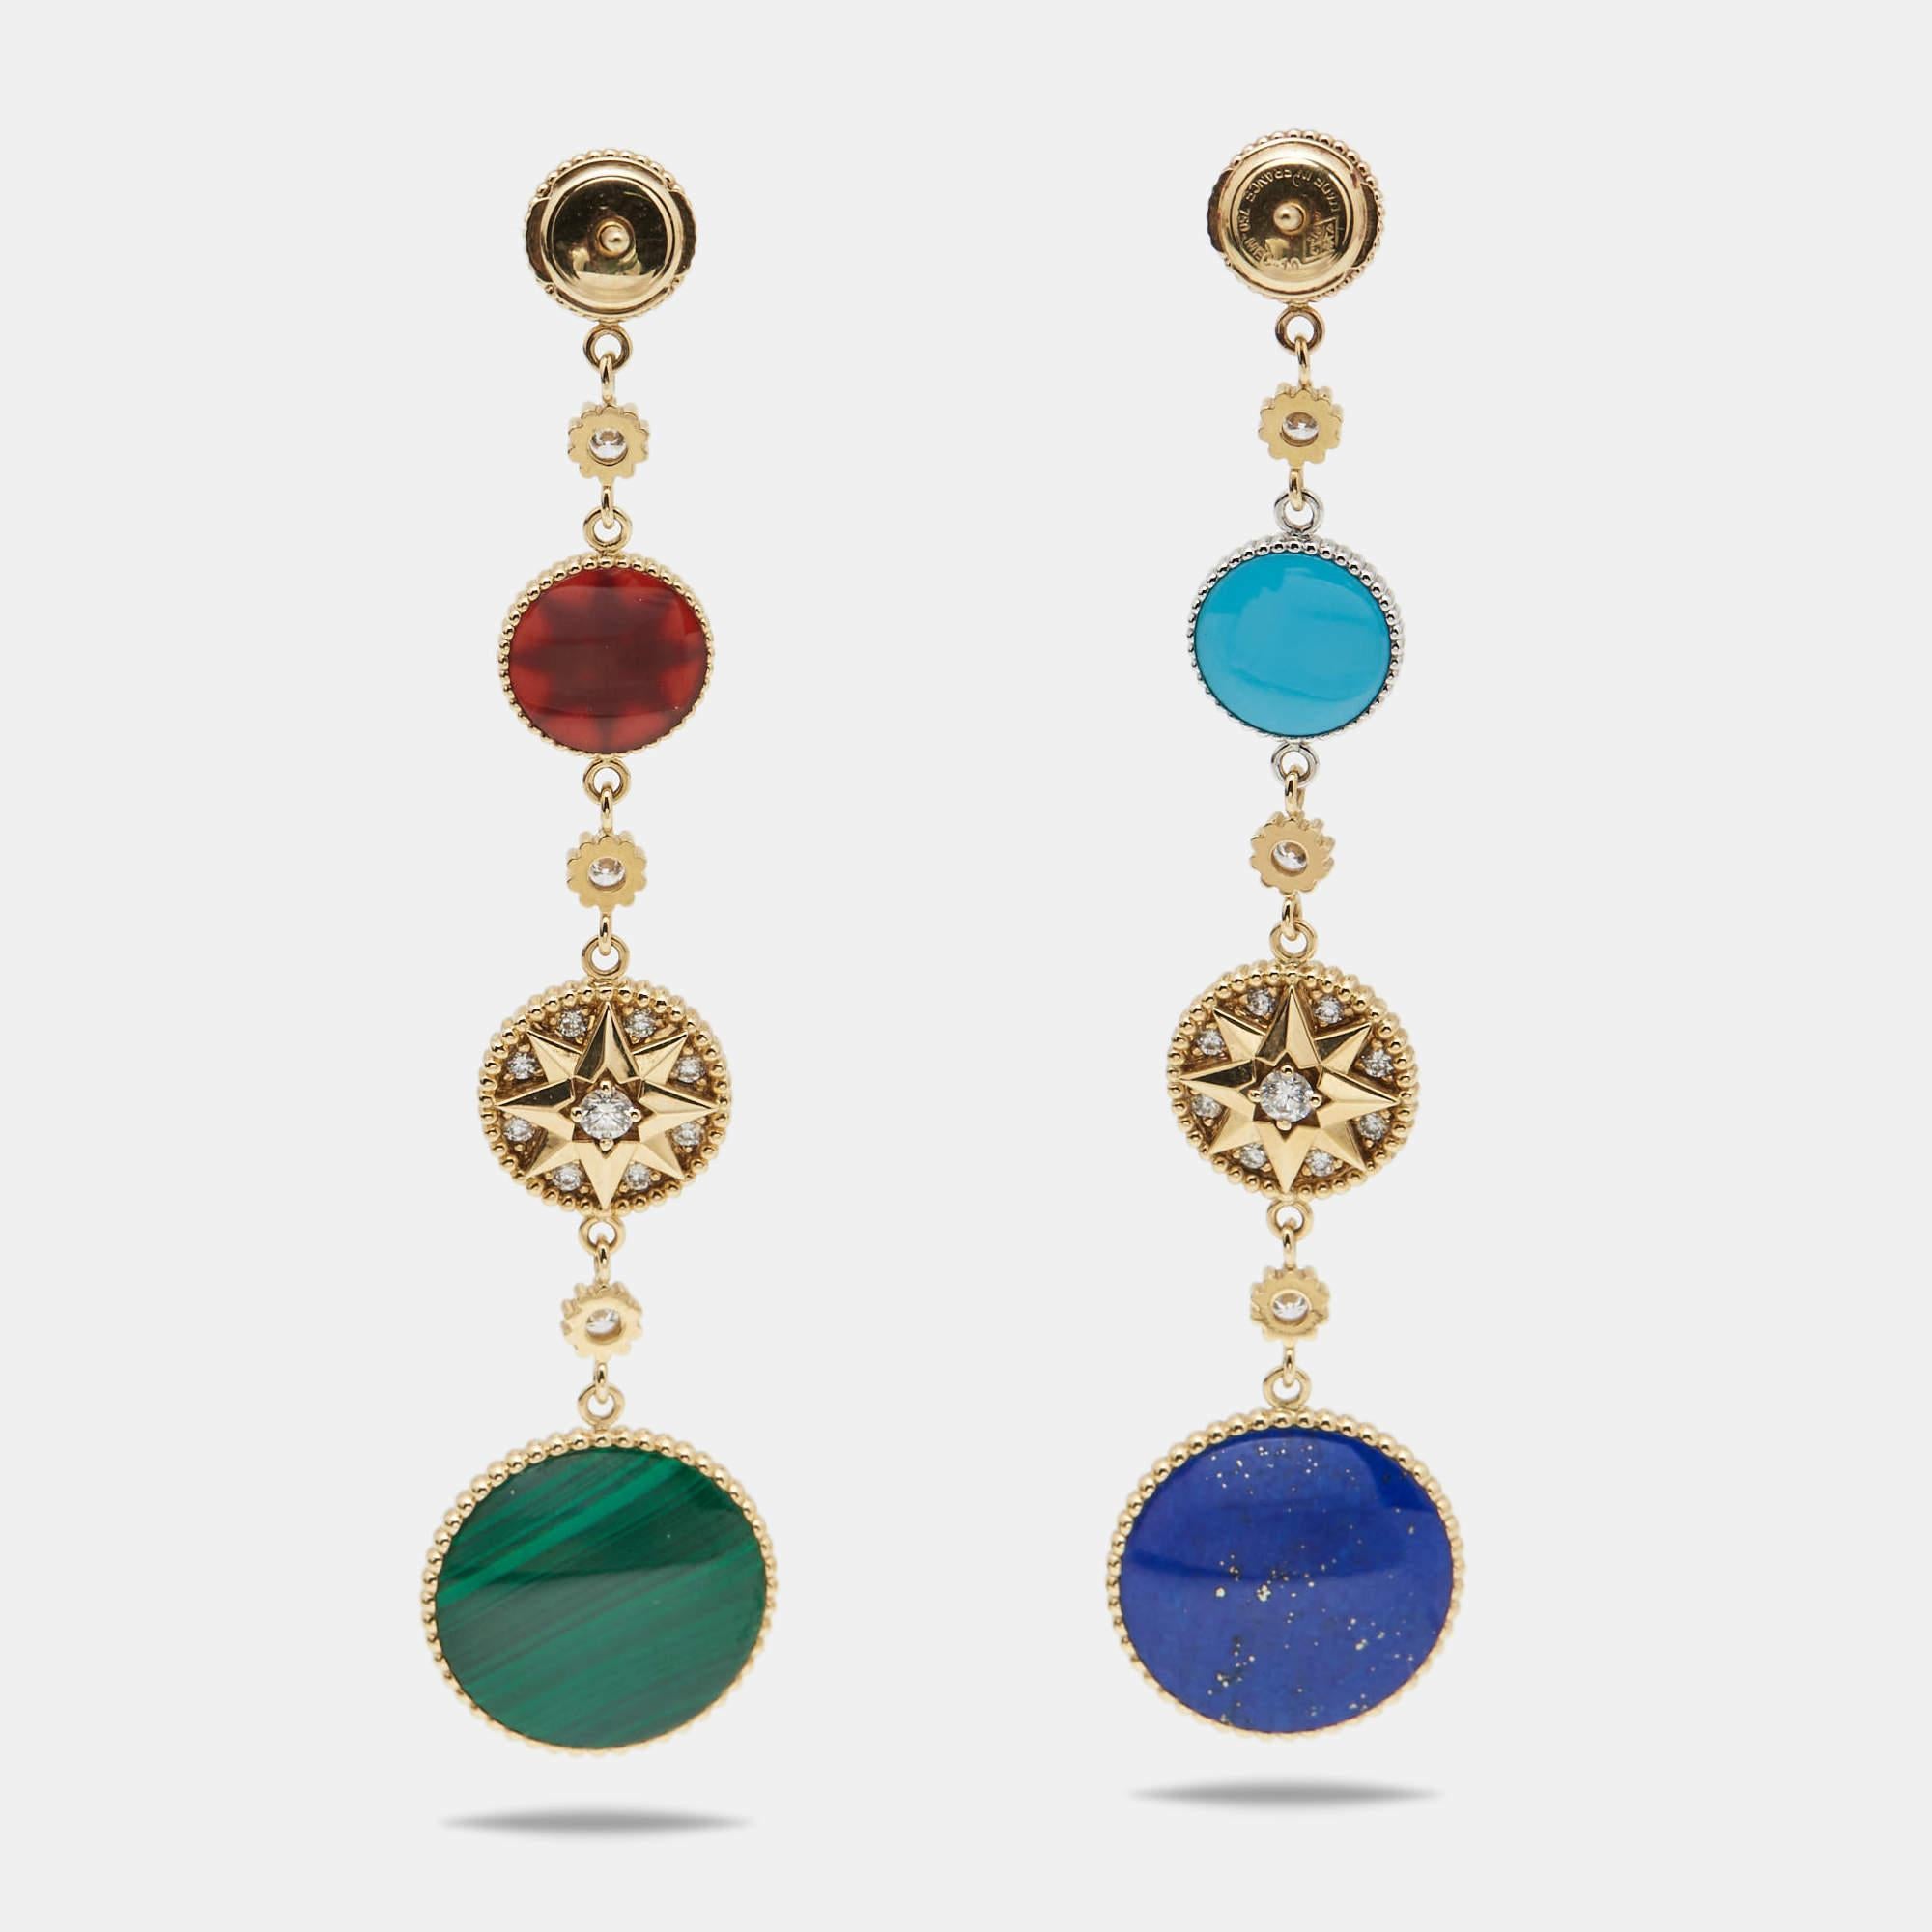 The Rose des Vents earrings by Dior exhibit the talisman star as its main highlight. Crafted using two-tone 18k gold, they are adorned with diamond, lapis lazuli, malachite, turquoise, carnelian, onyx, and rose quartz. Such a stunning creation is